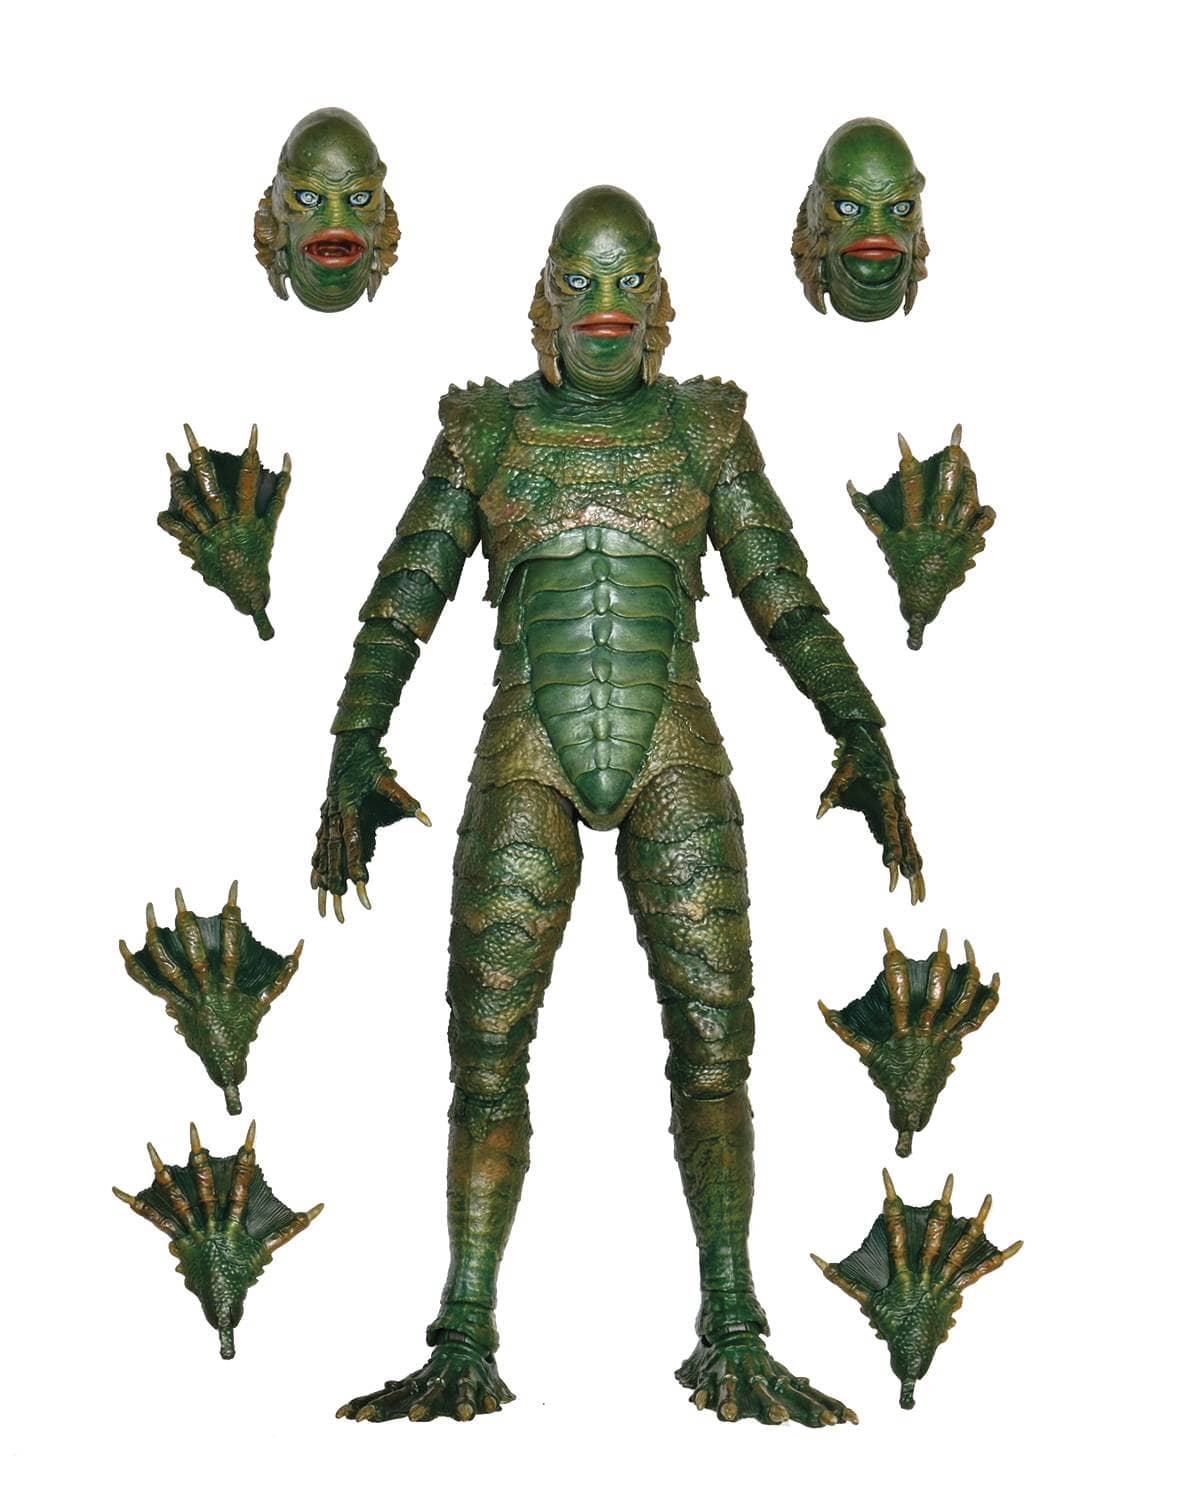 NECA: Universal Monsters - Ultimate Creature from the Black Lagoon 7"